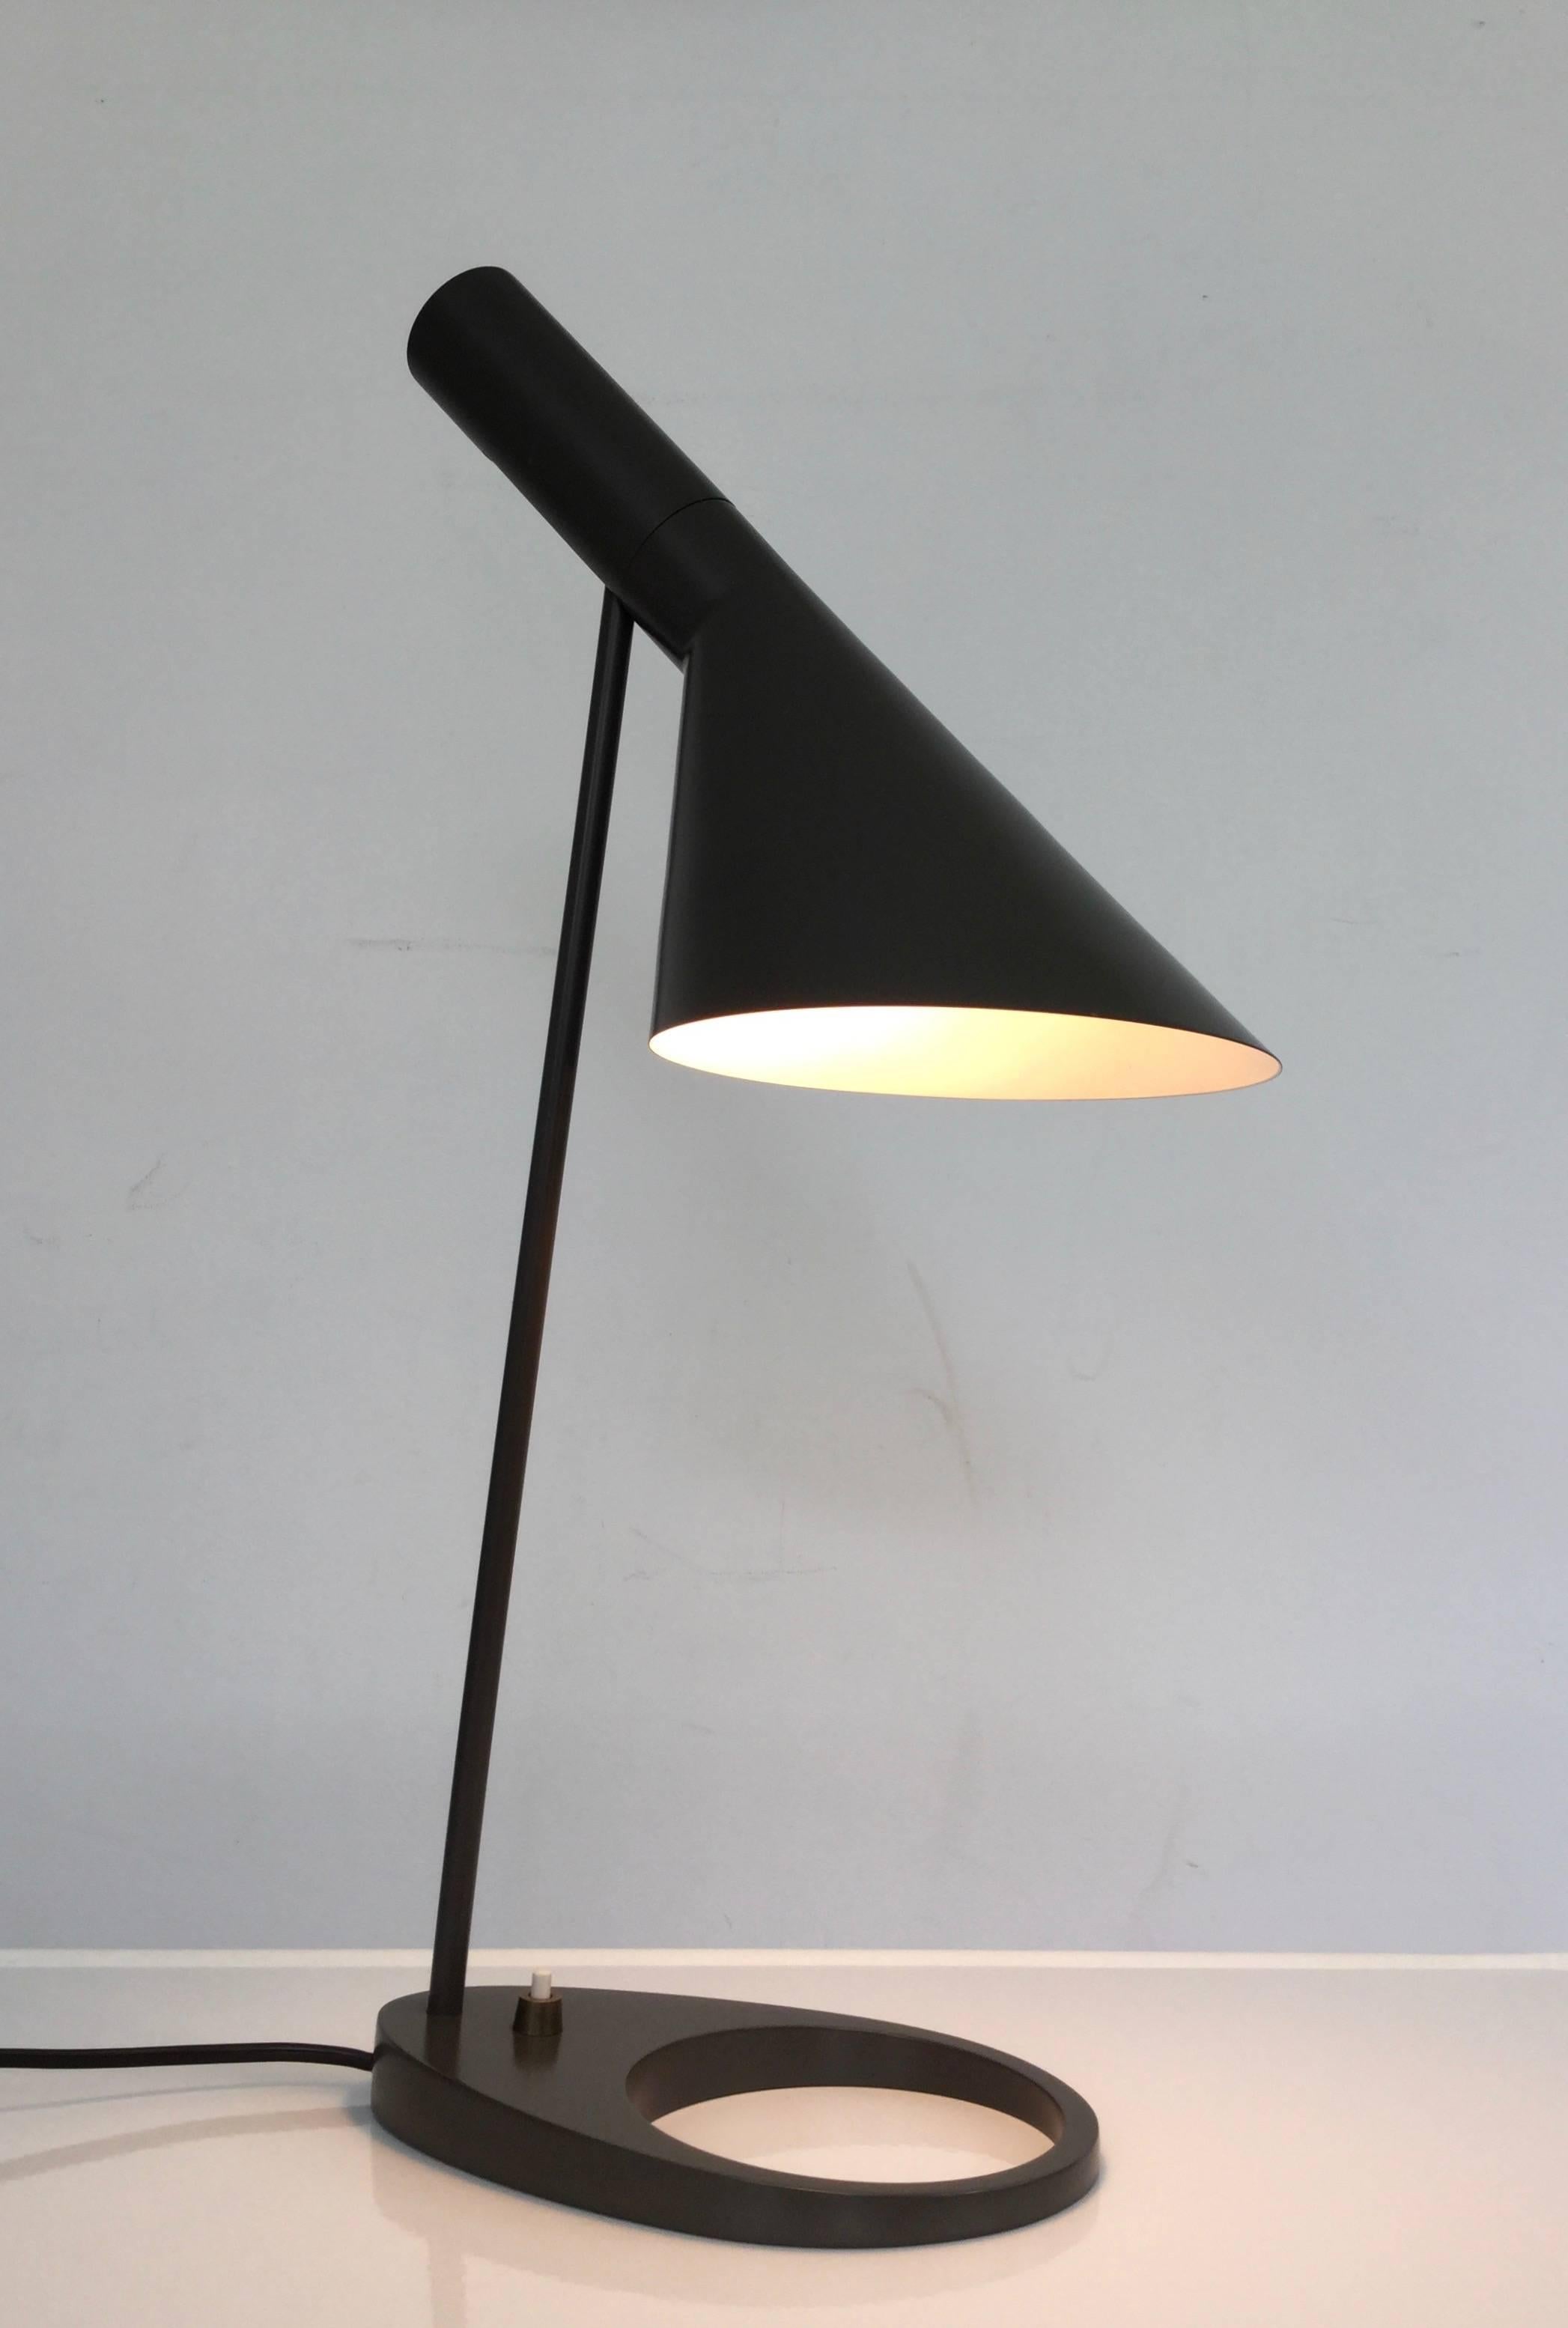 Arne Jacobsen AJ Visor table lamp by Louis Poulsen in distinct green-brown-grey color. 
Early example, recognizable by the brass switch on the base, in exceptional good condition. The true age of this lamp is only recognizable by the smaller